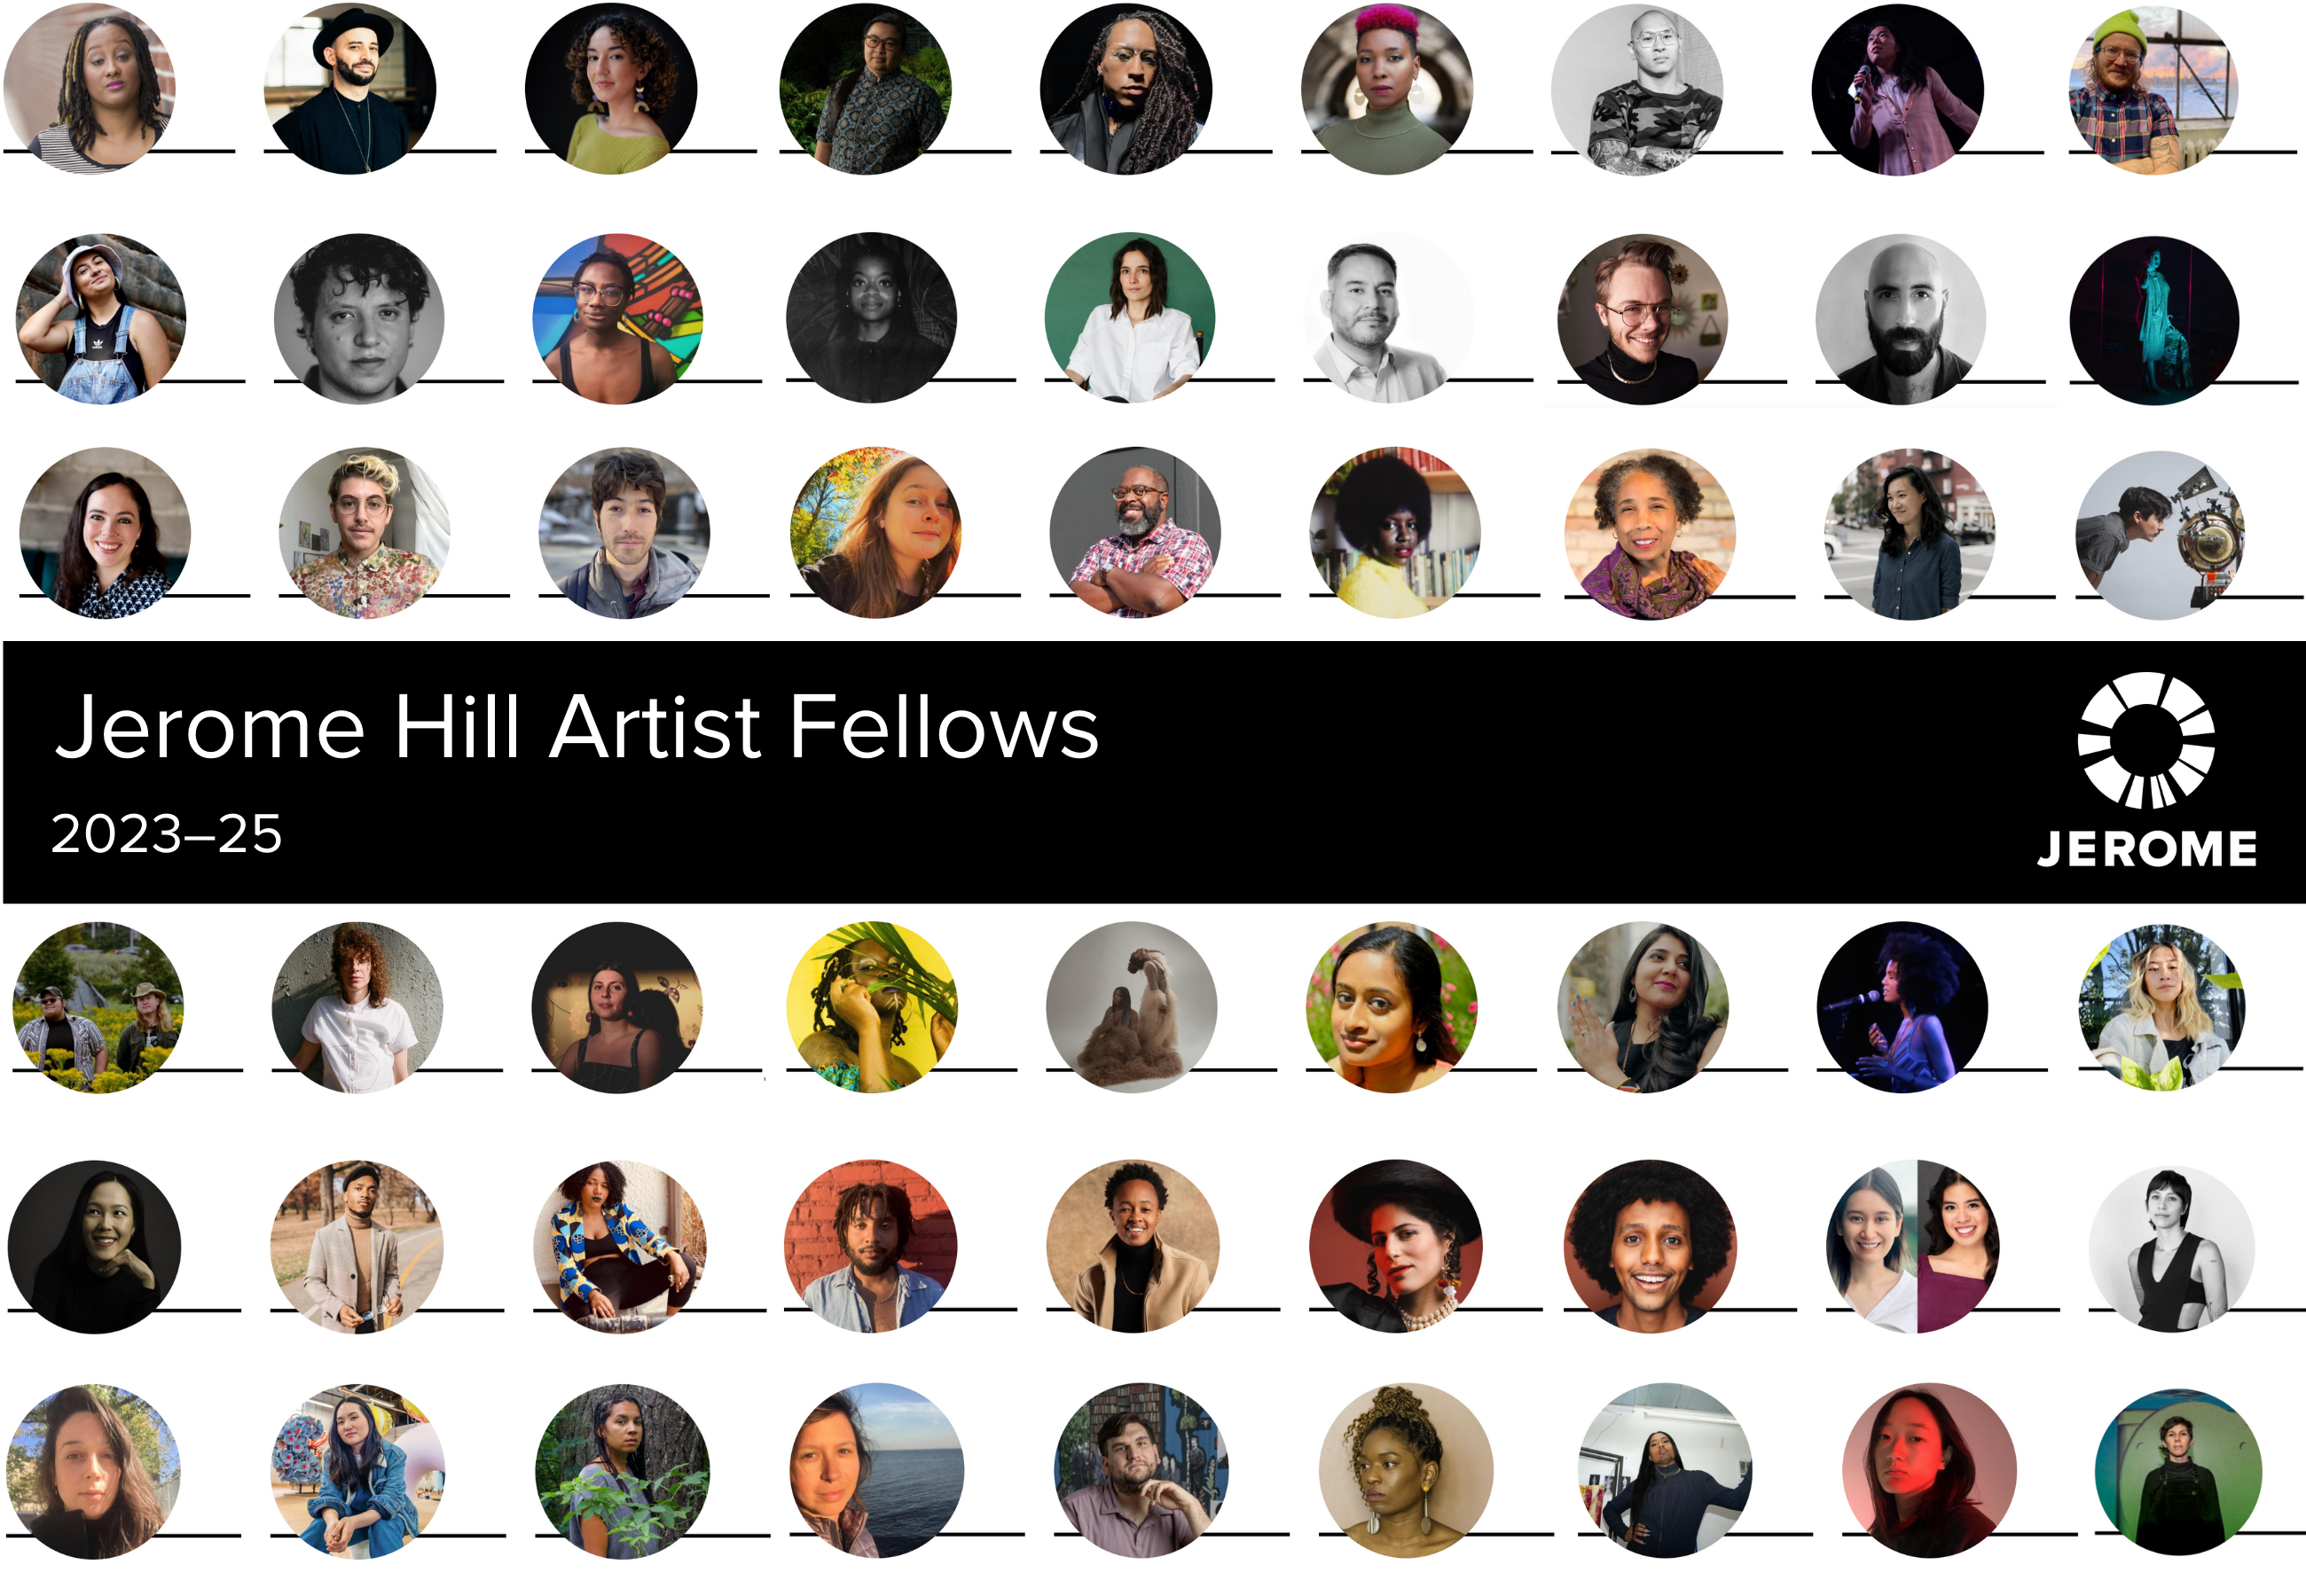 An image showing all 54 Jerome Hill Artist Fellows for 2023; each fellowship is represented by a portrait in a circle of an artist.